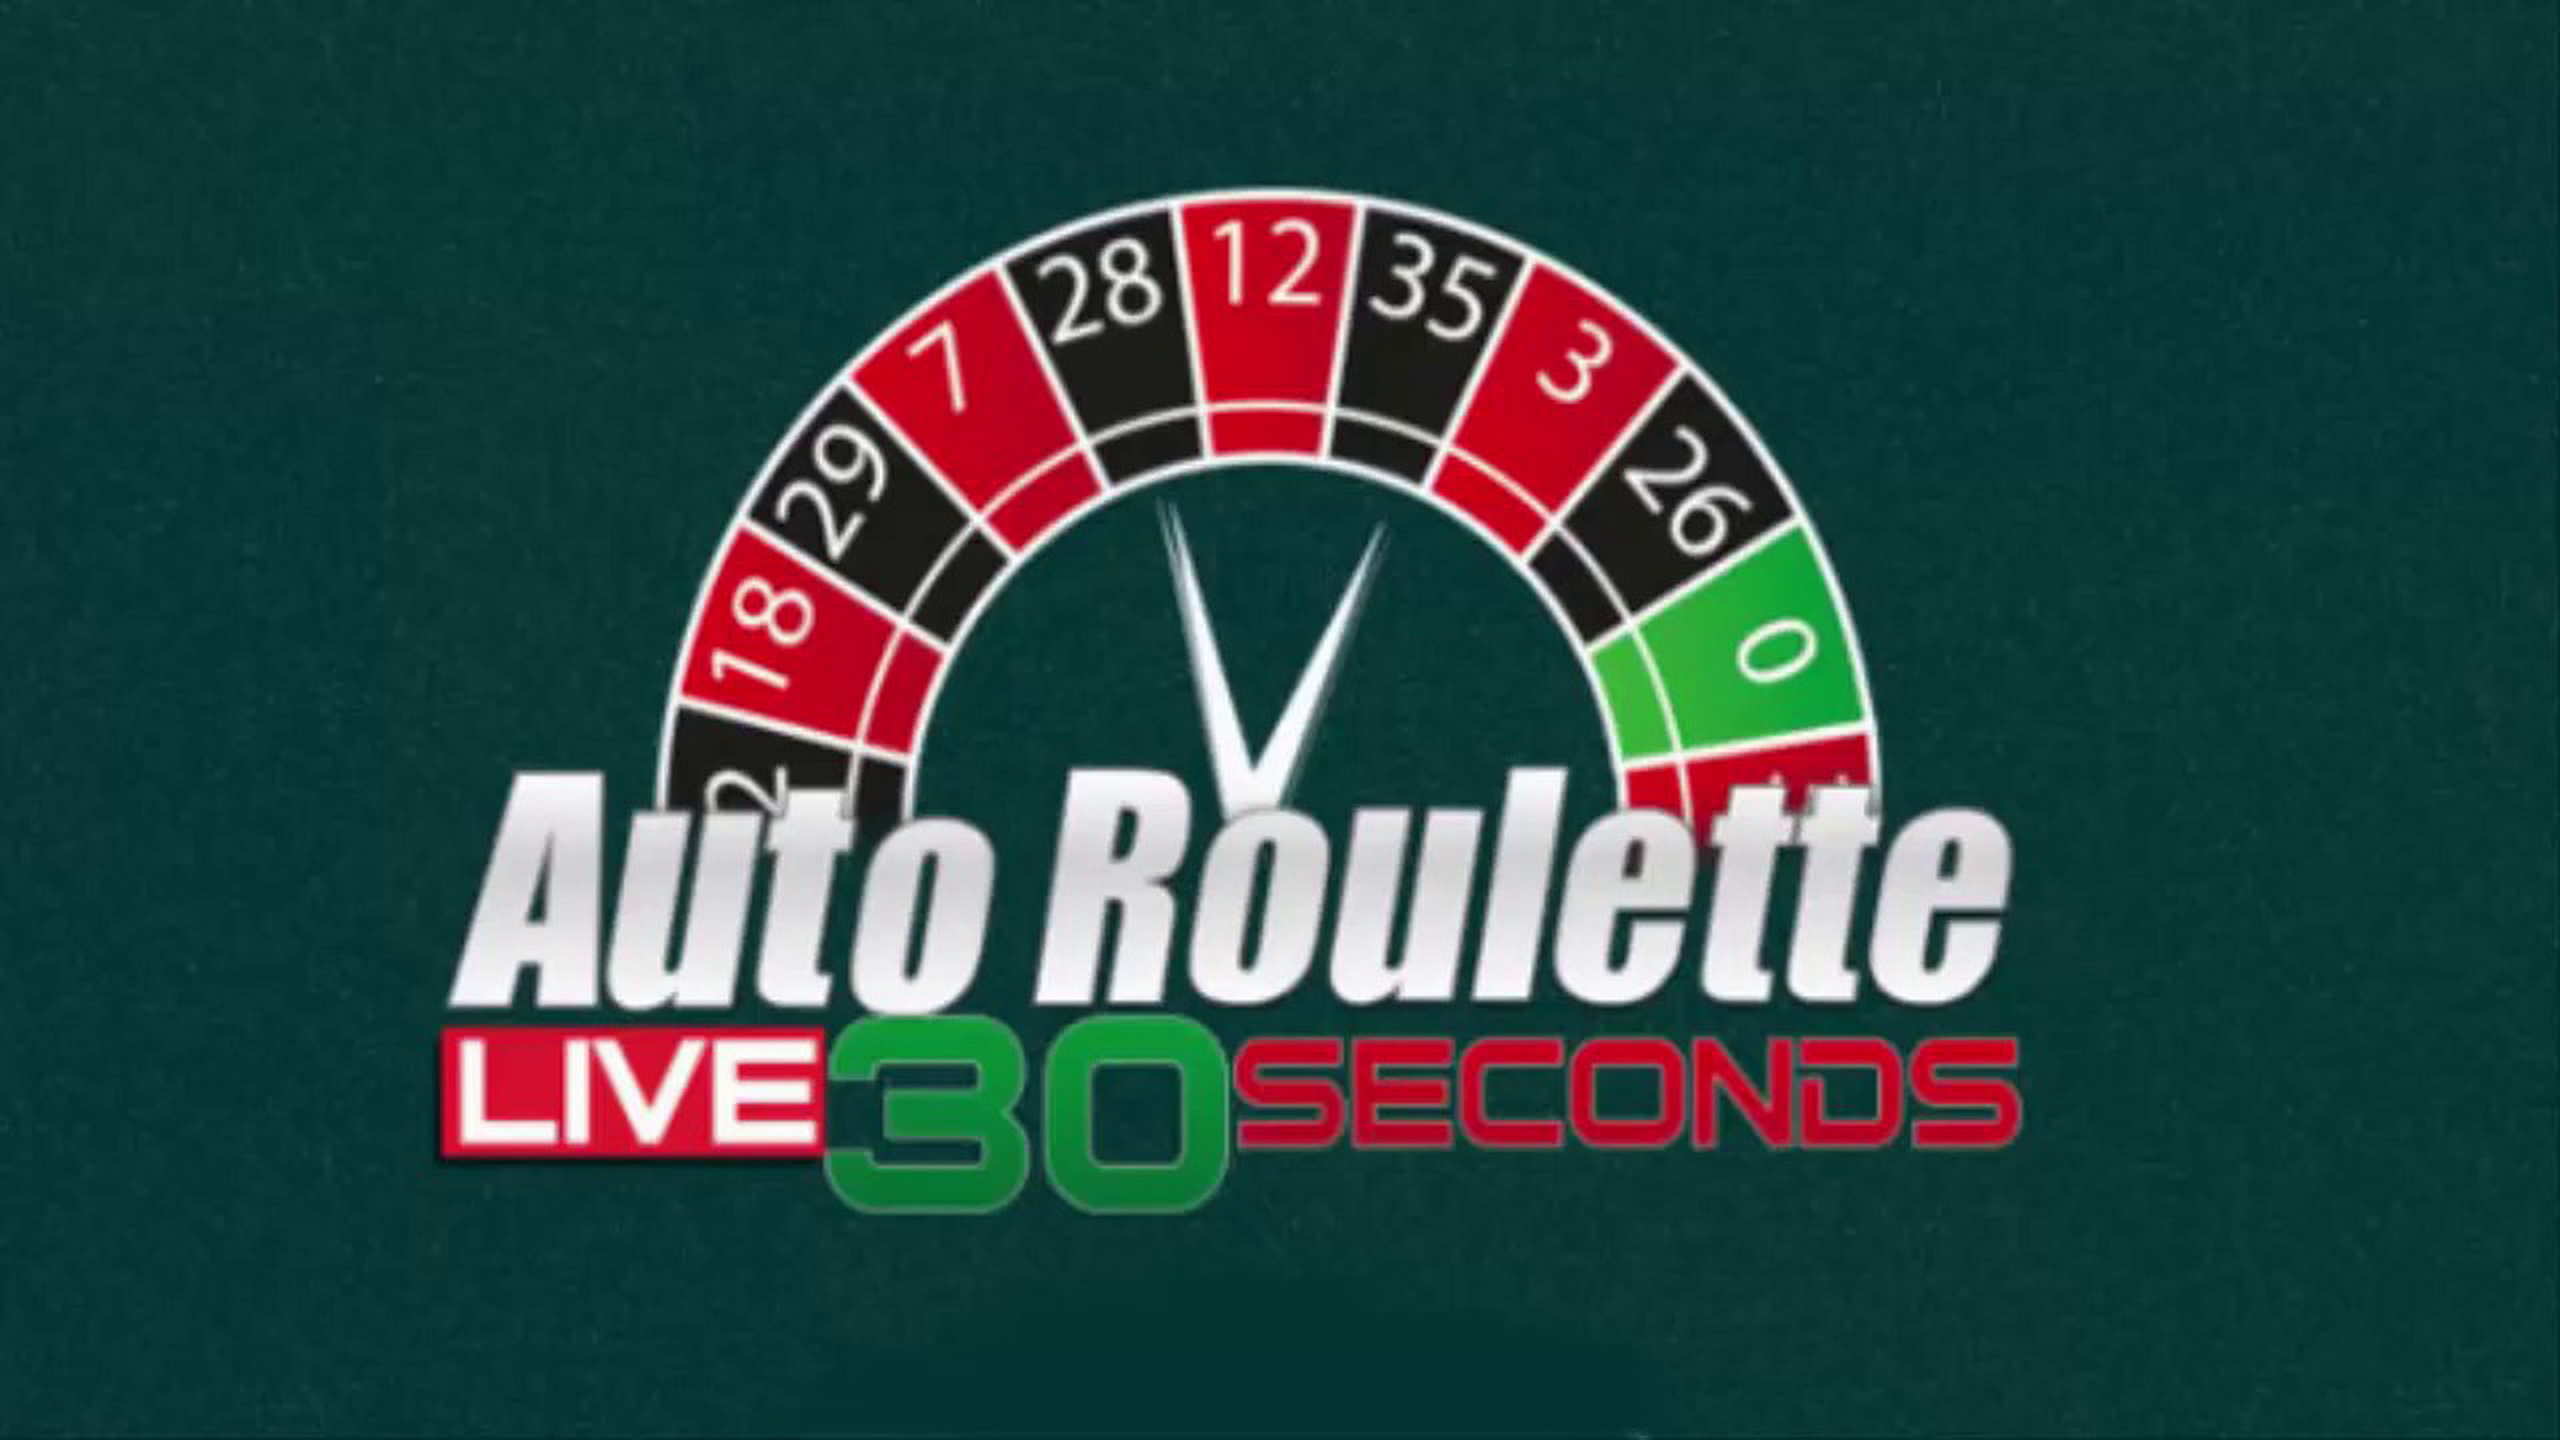 The Auto Roulette Live 30 Seconds Online Slot Demo Game by Authentic Gaming